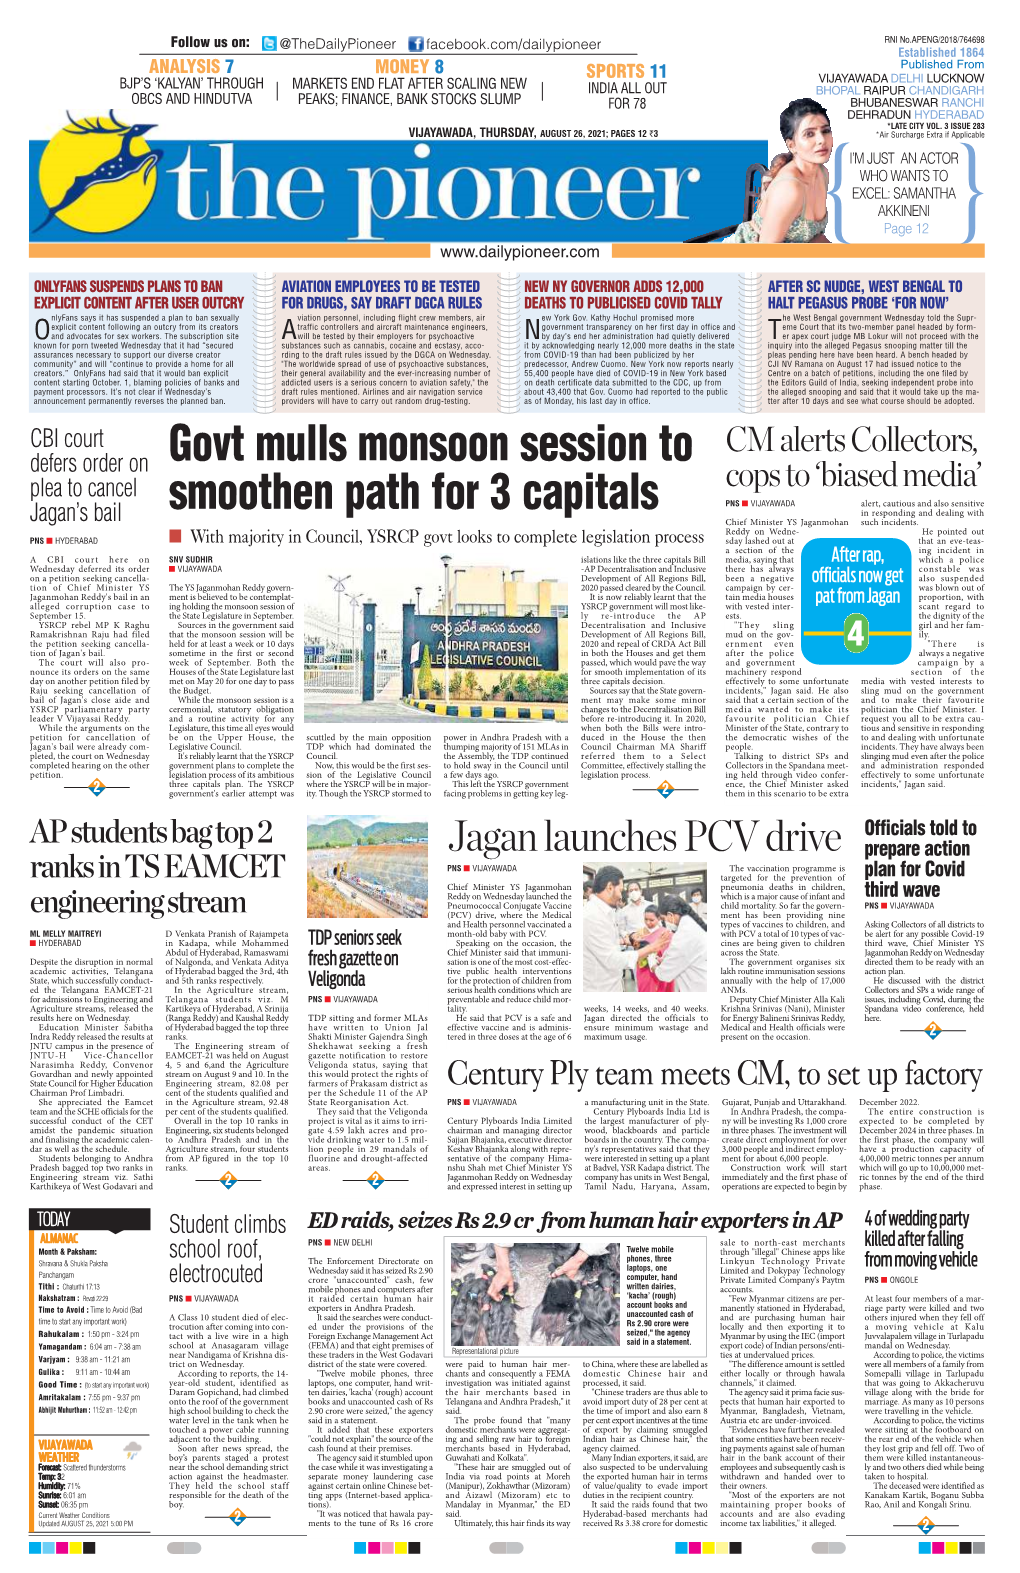 Govt Mulls Monsoon Session to Smoothen Path for 3 Capitals